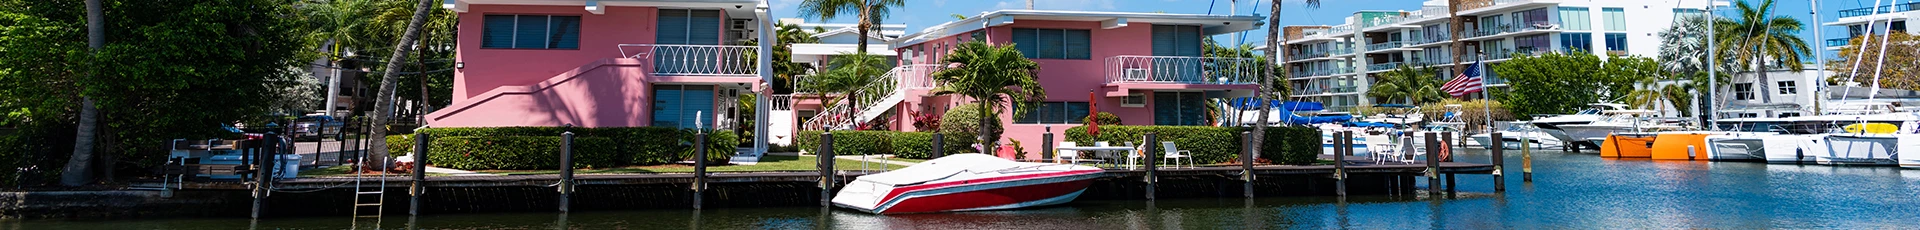 Boat Removal, Dismantle and Disposal in Sunny Isles Beach Florida